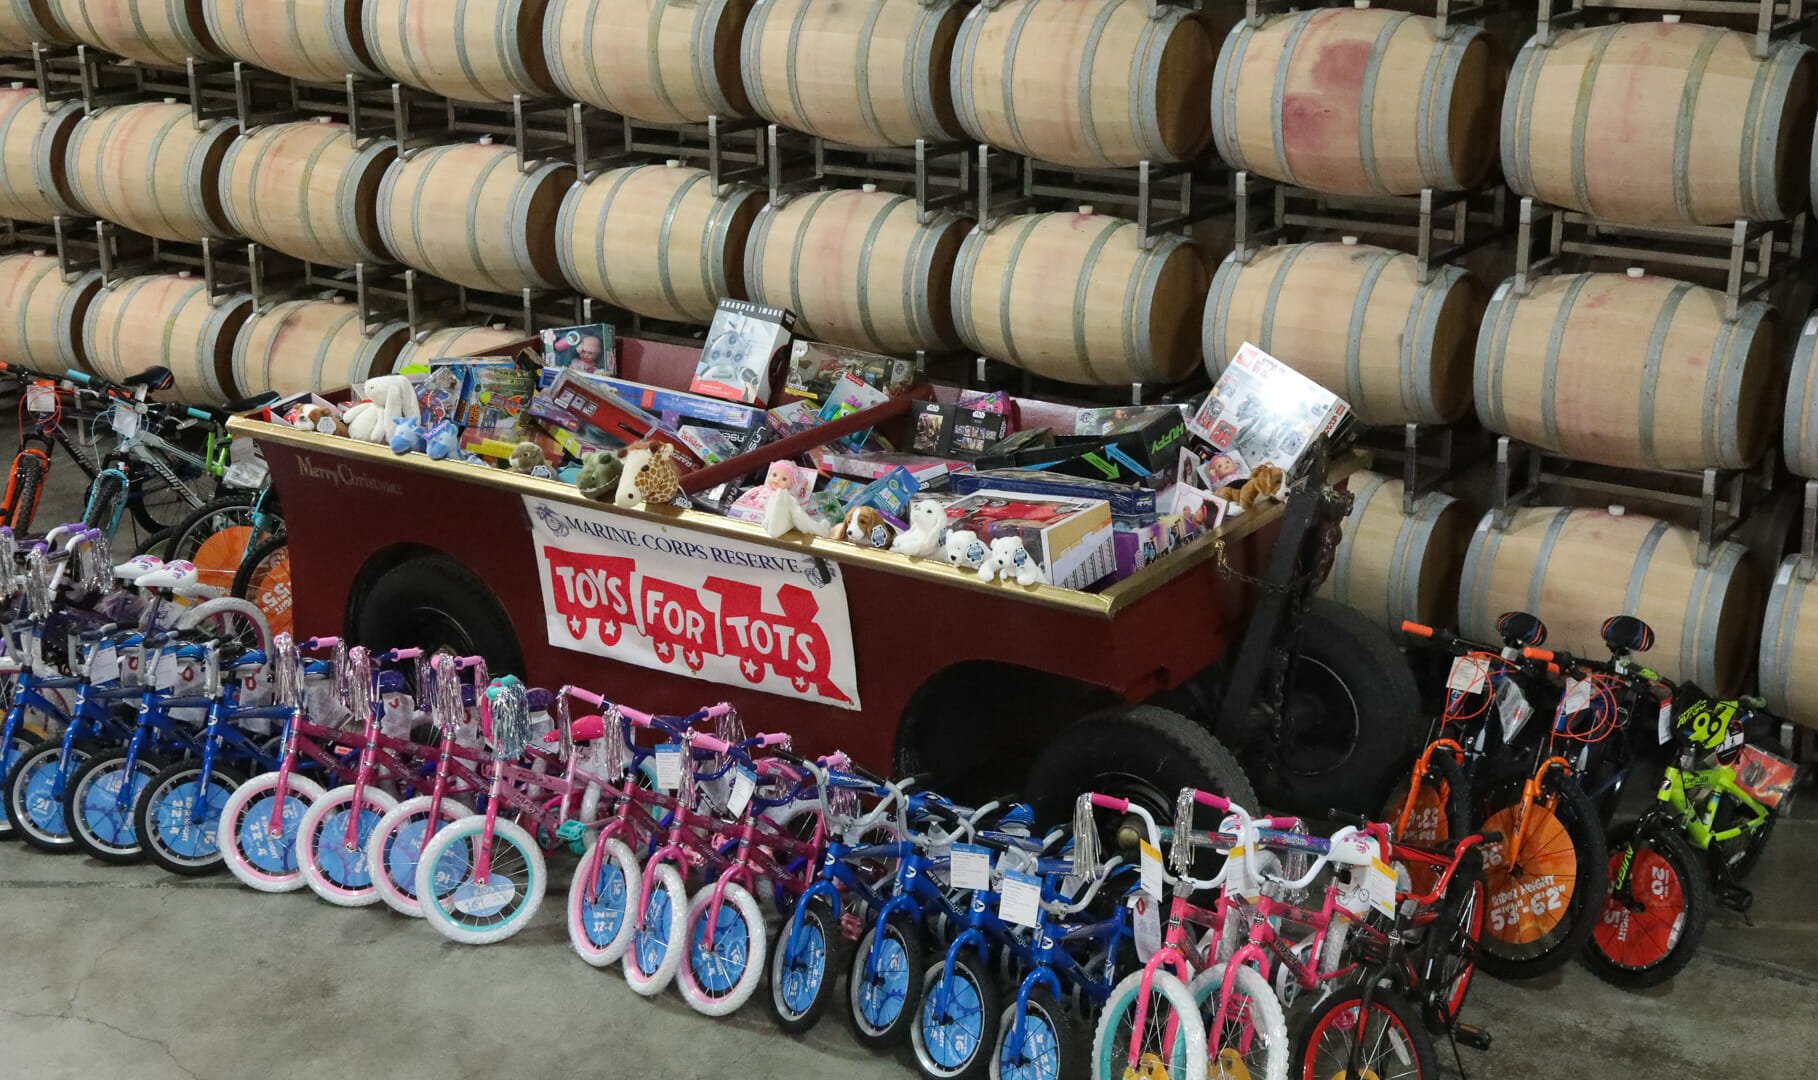 Toys for Tots donations, bikes in a line, Jordan Winery gondola